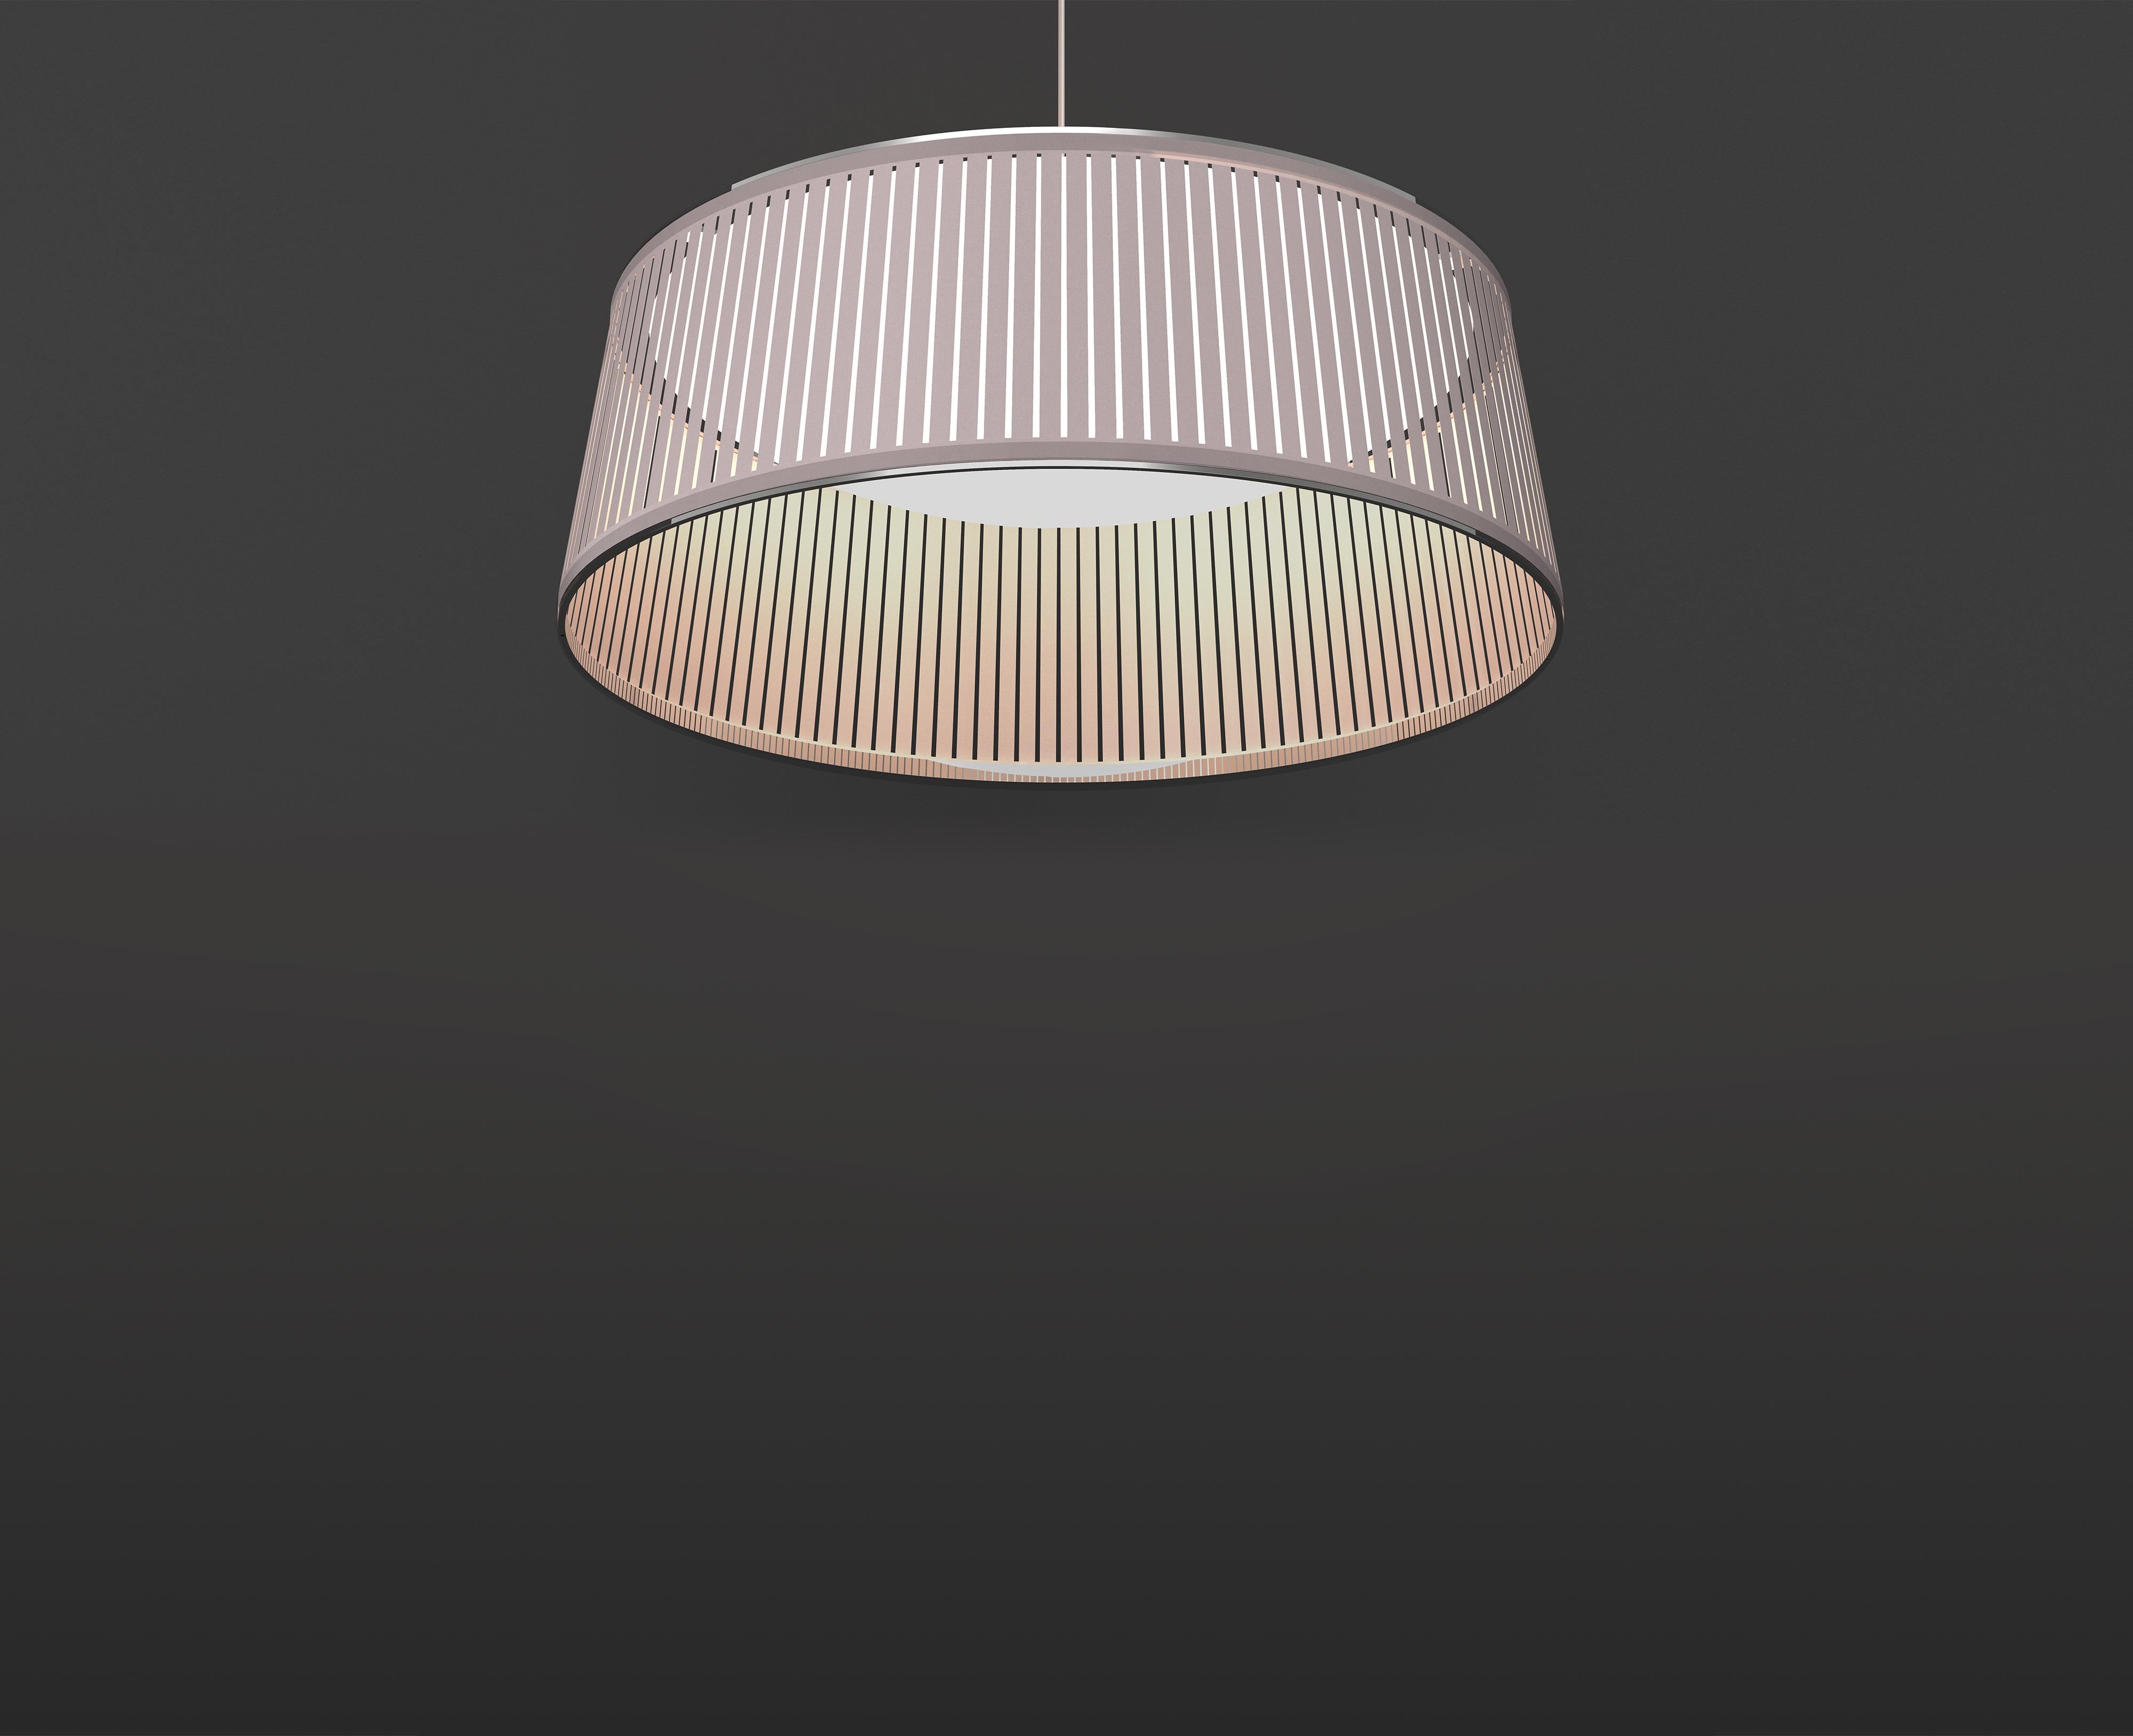 The new Solis Drum pendant is the latest addition to the elegant Solis suspension family. Featuring a uniquely engaging blend of light and shadow, Solis Drum is made of laser cut polyester fabric combined with an aluminum top and bottom ring